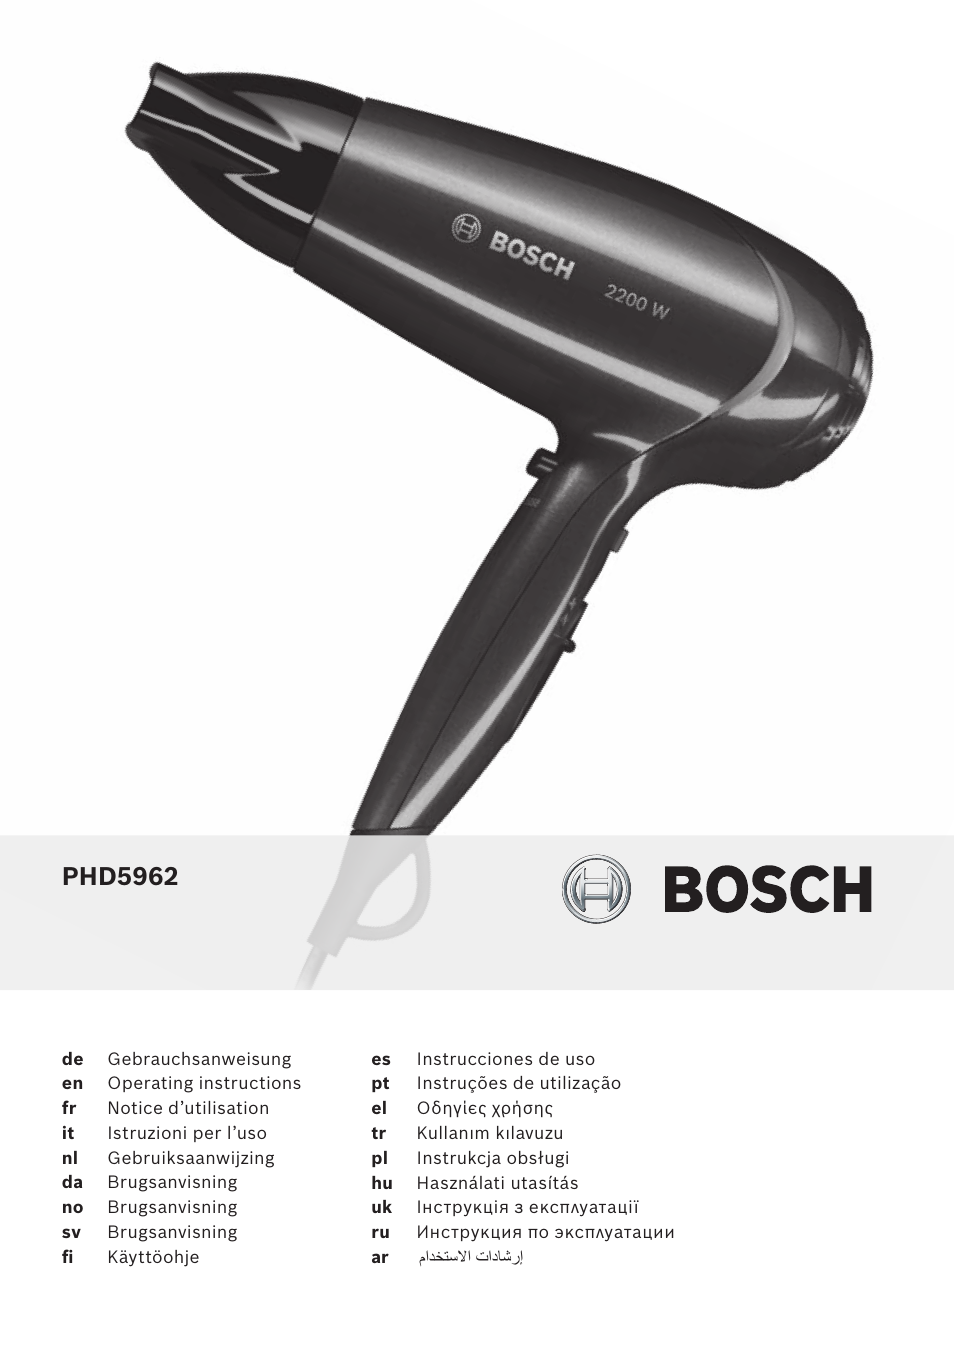 Bosch PHD5962 Haartrockner PureStyle User Manual | 93 pages | Also for: PHD5962  PureStyle, PHD5962